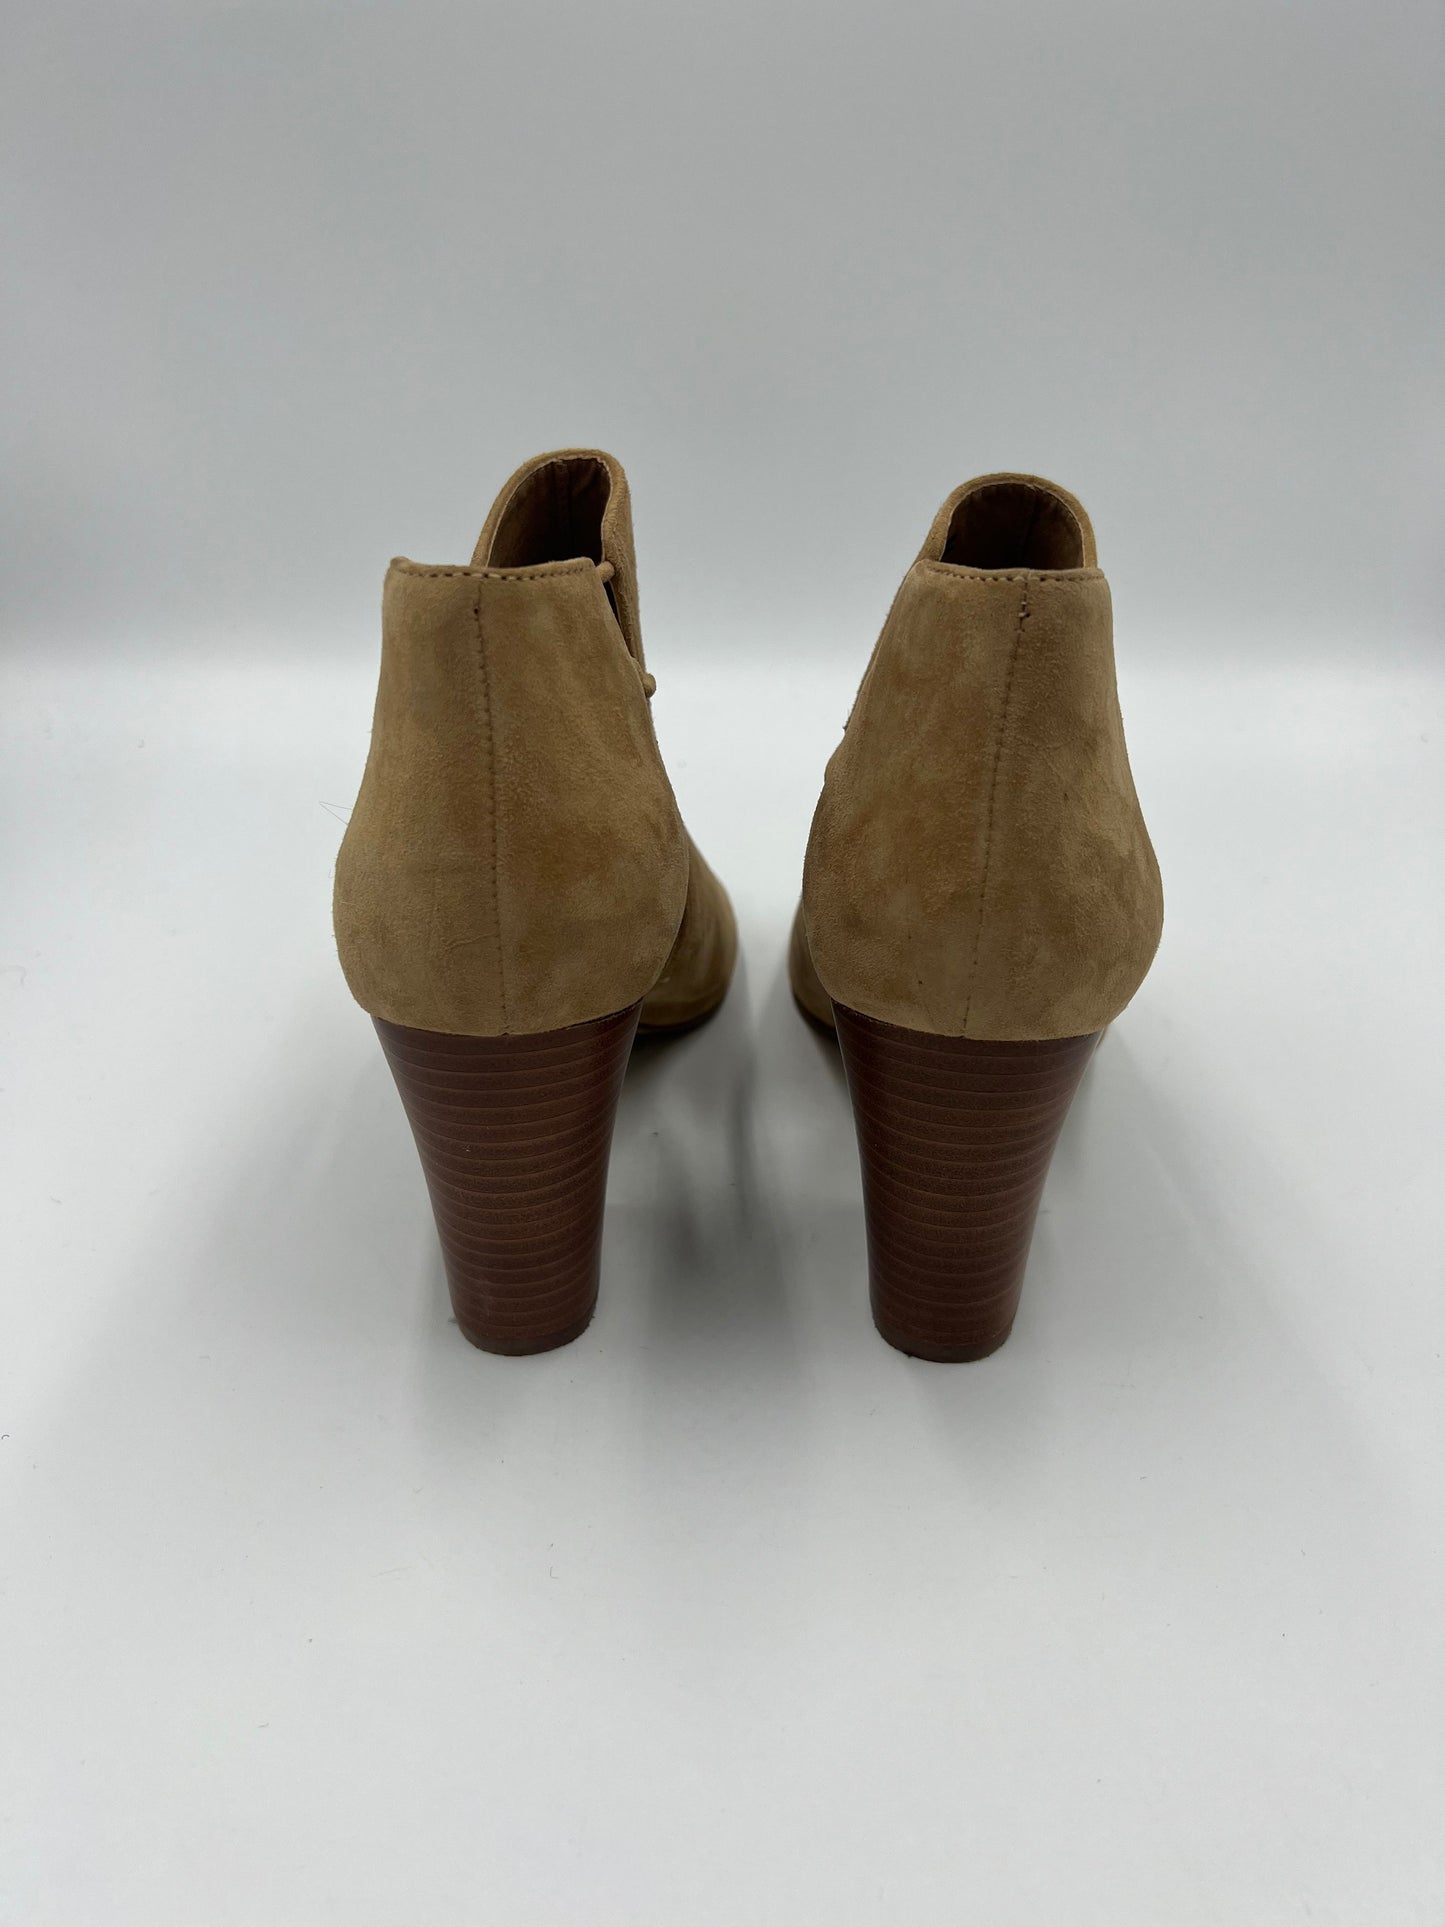 Boots Designer By Tahari  Size: 8.5